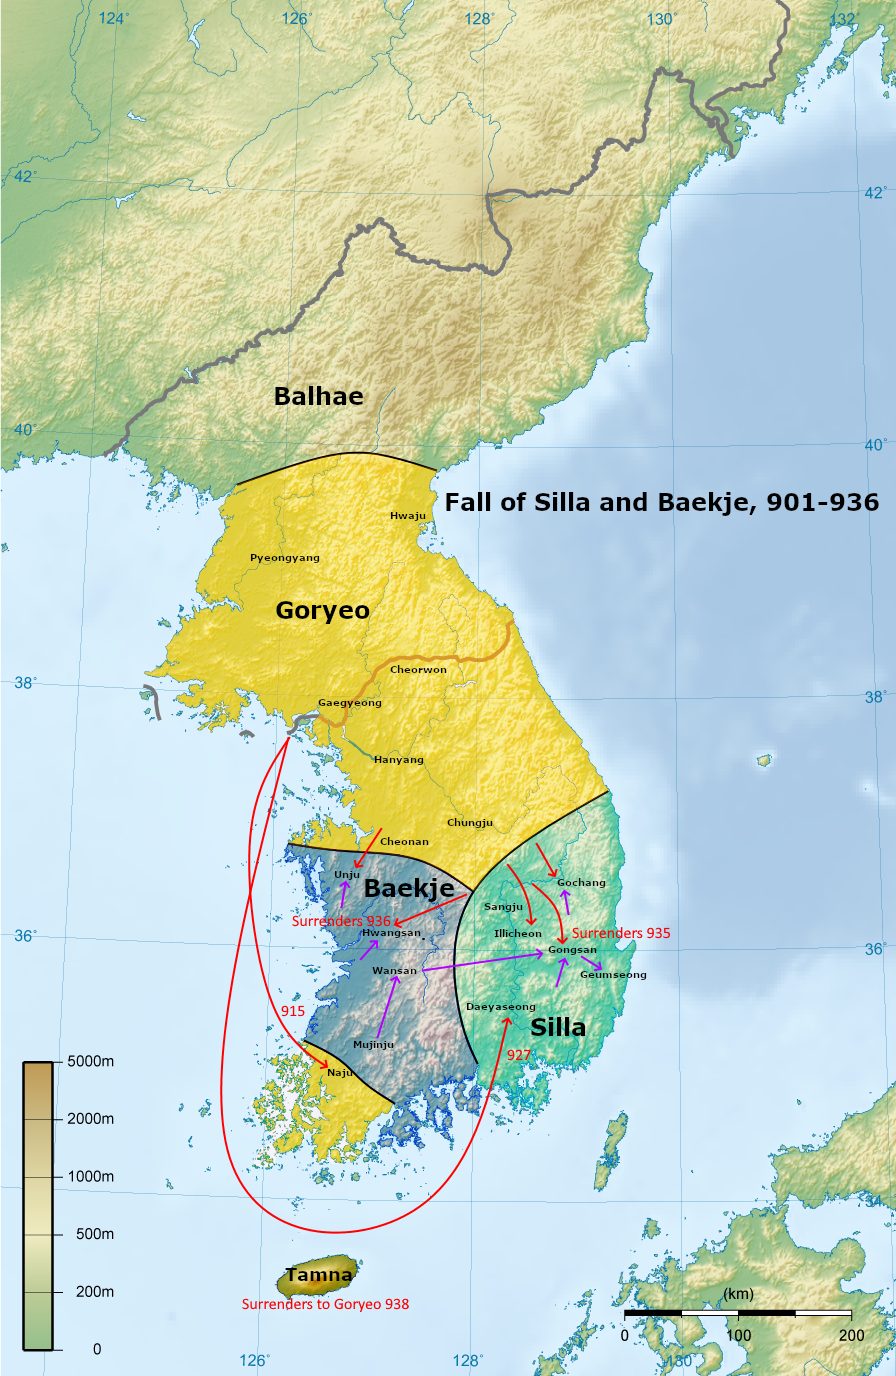 Goryeo reunification of the Later Three Kingdoms